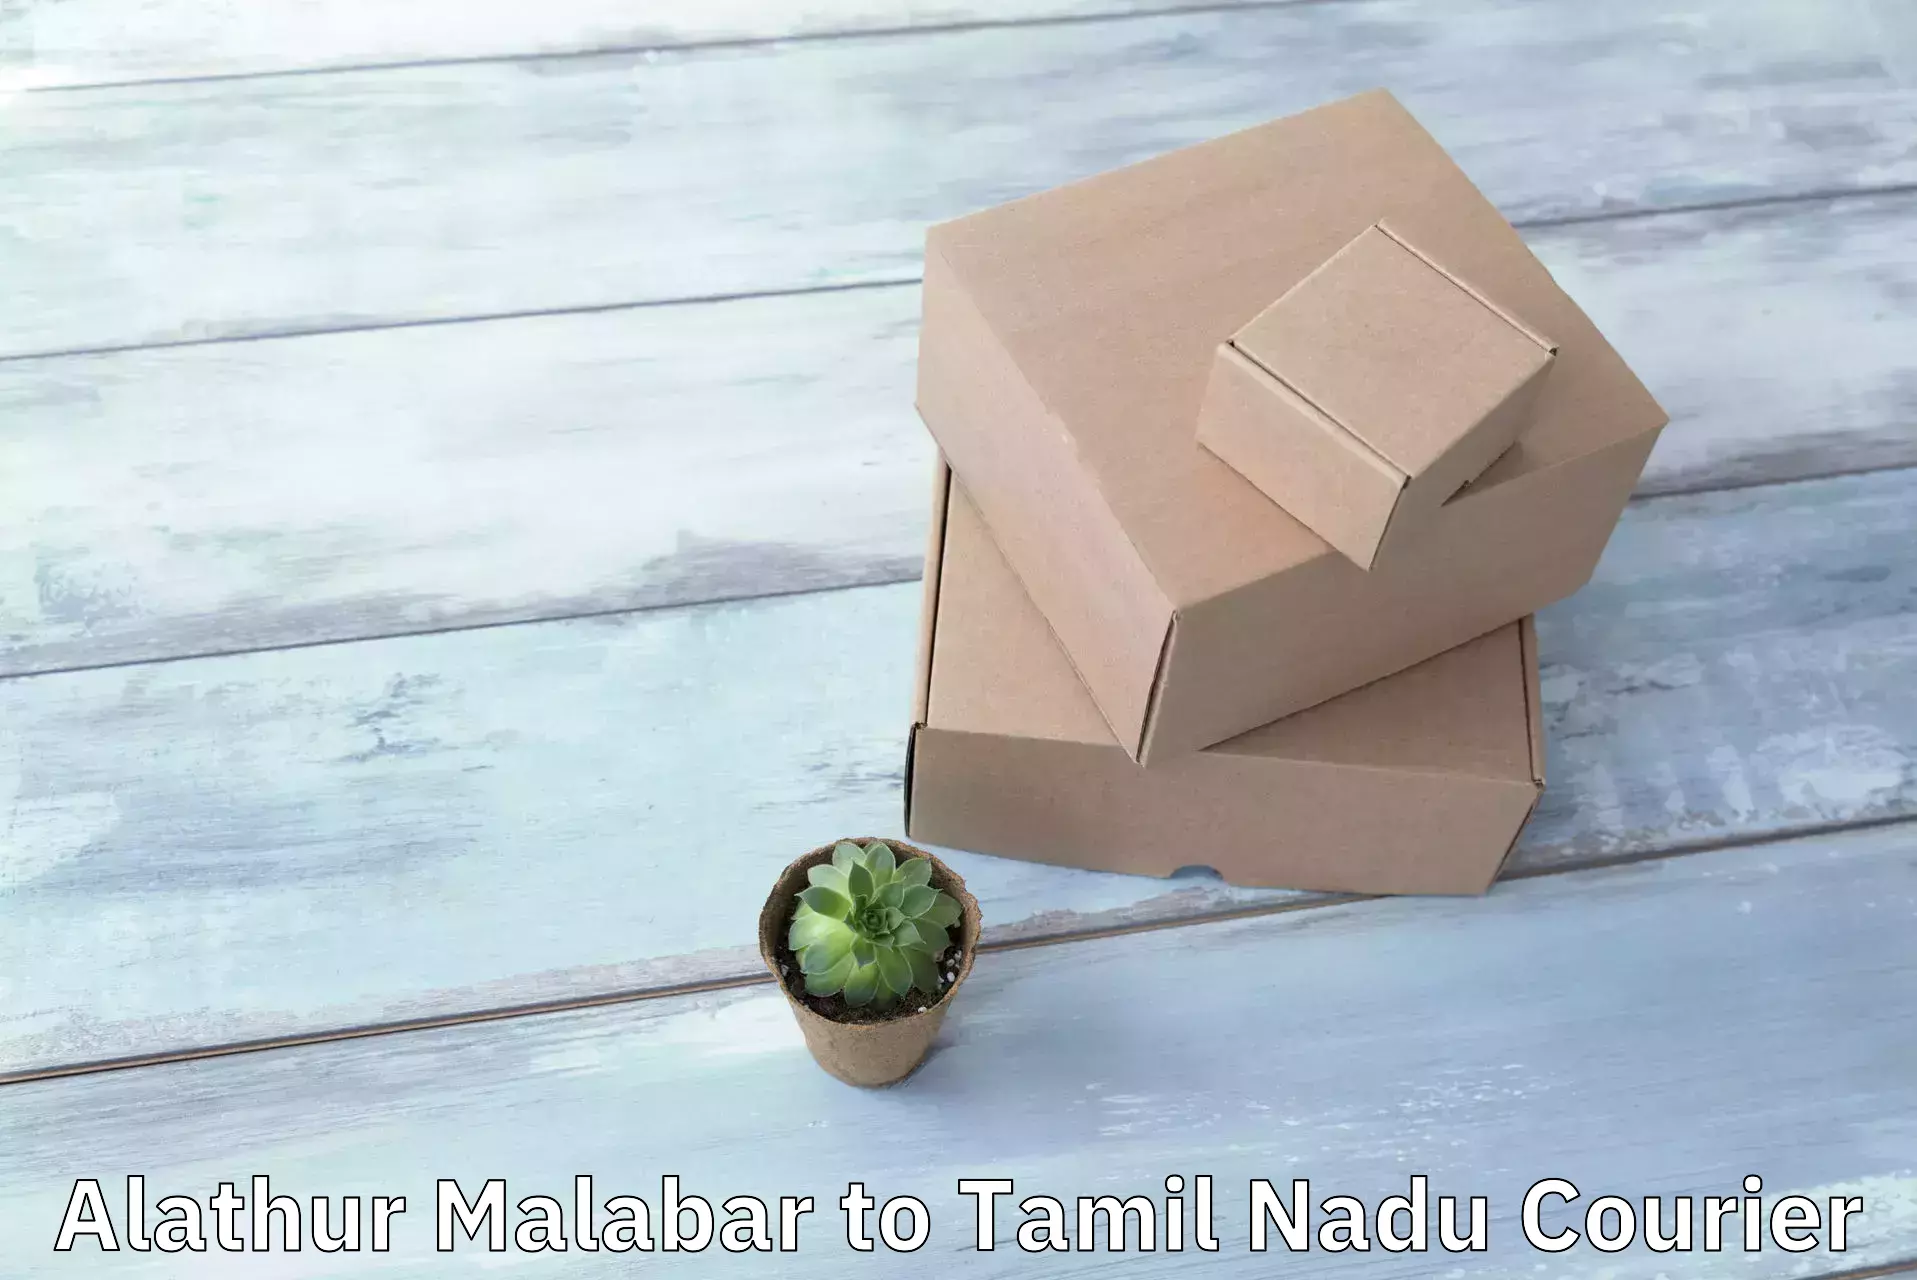 Same-day delivery solutions Alathur Malabar to Memalur